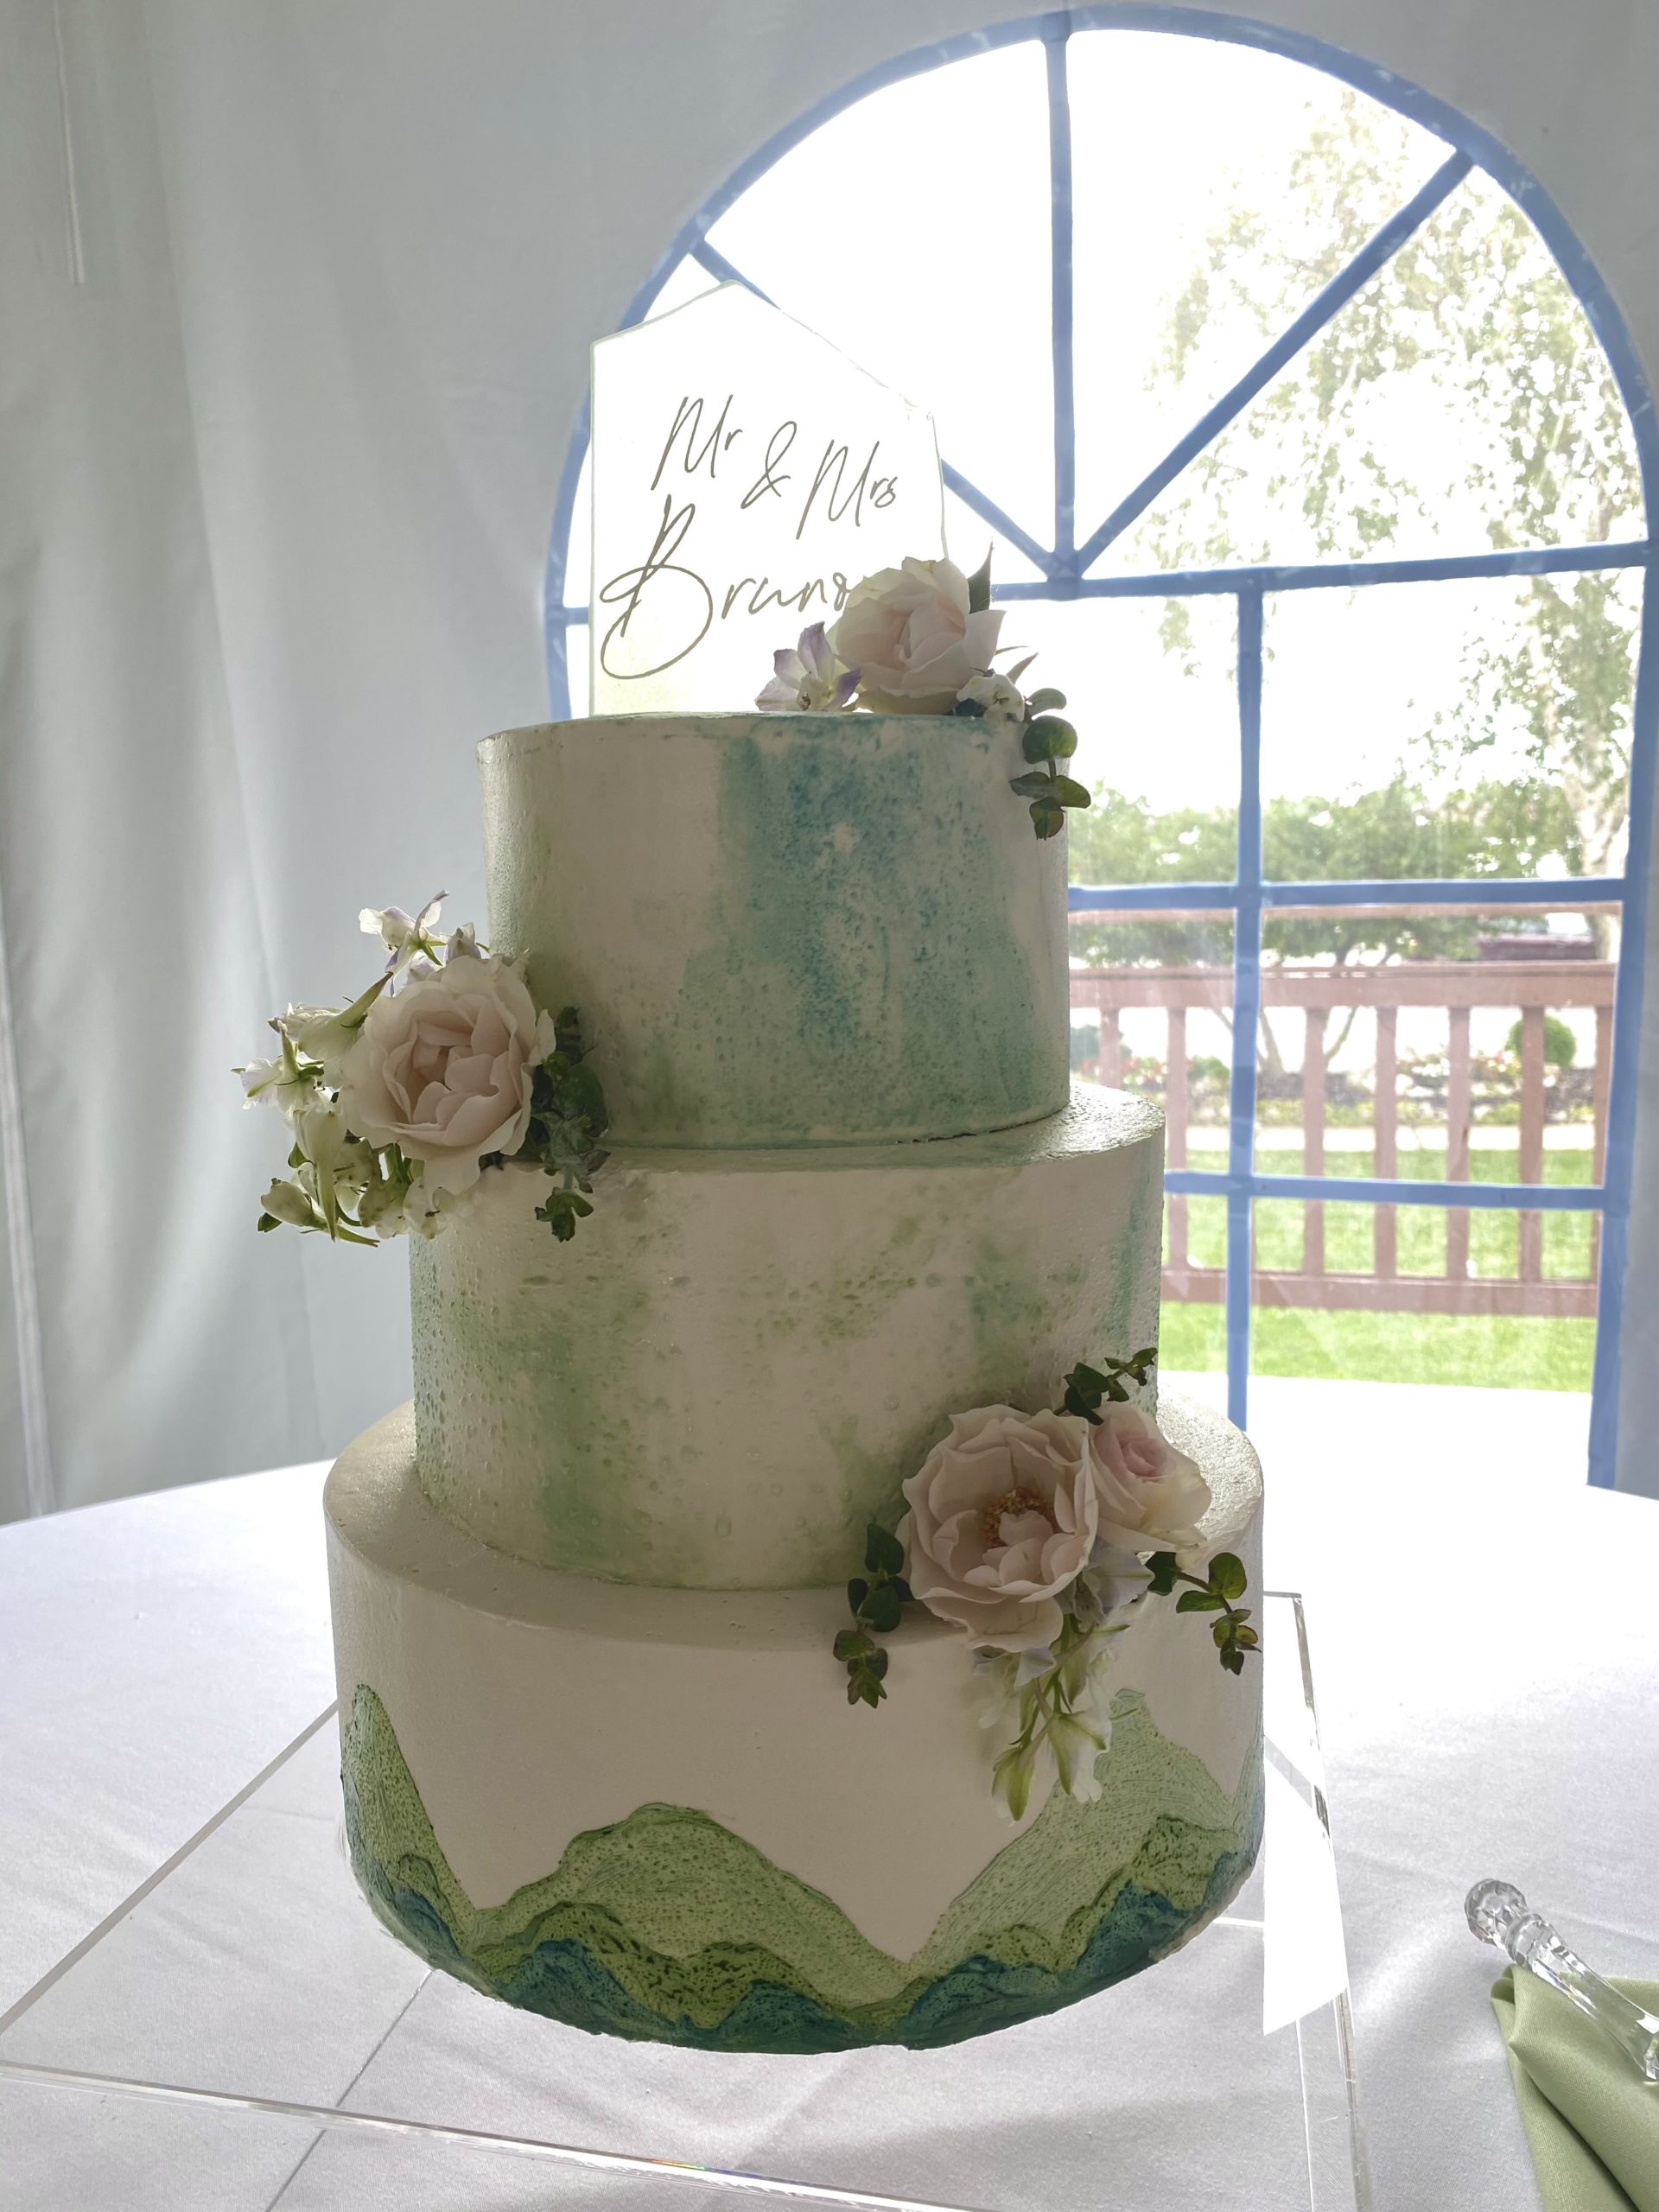 A beautiful 3-tier custom wedding cake with watercolor detail and live flowers from Village Patisserie in Toledo, Ohio